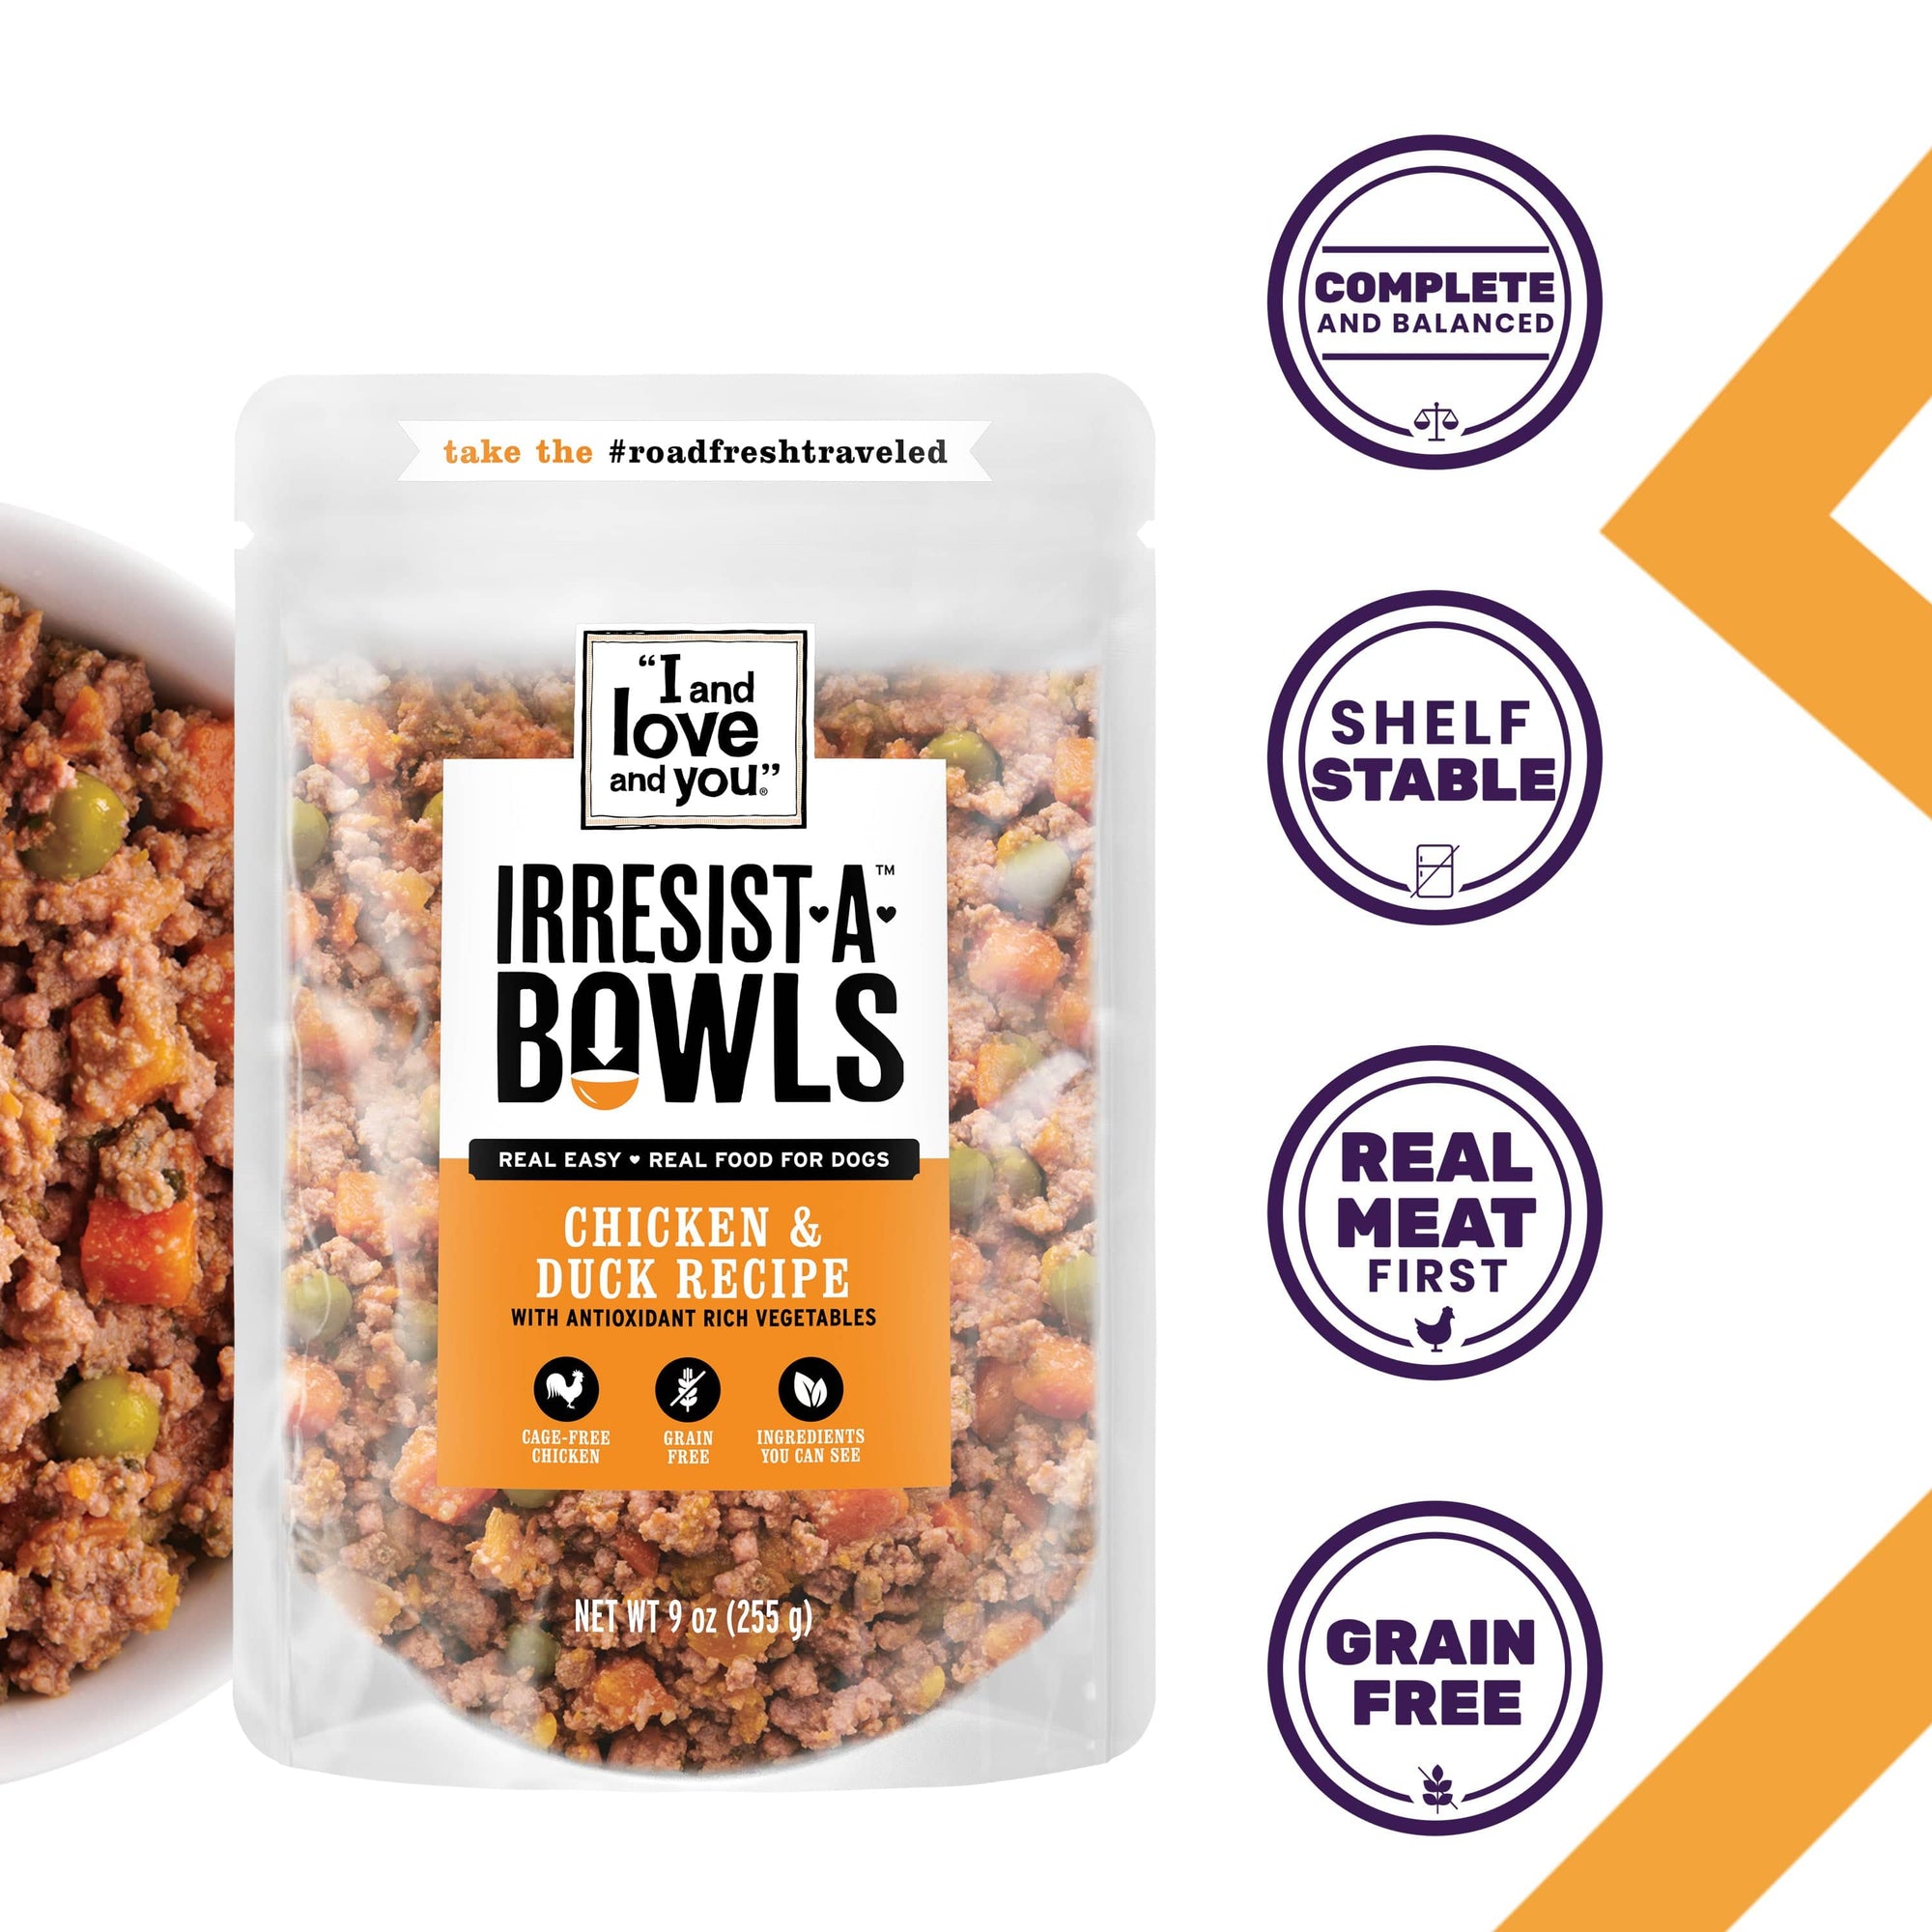 Irresist-A-Bowls - Chicken & Duck Recipe pouch with homestyle savory bites and chunky veggies for your pet's mealtime delight.